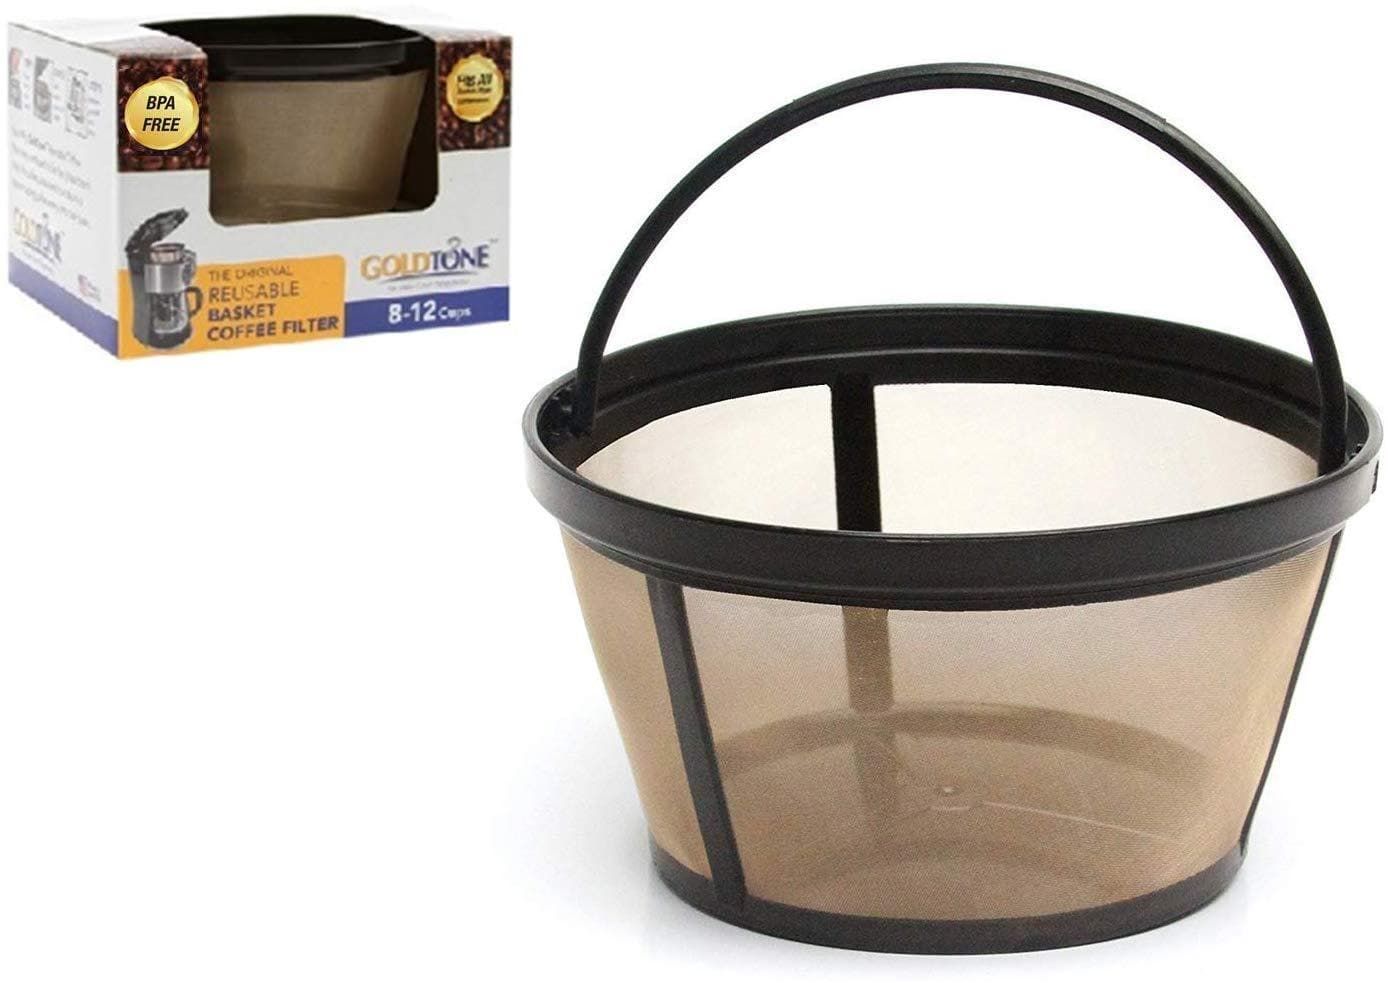 Cafe Brew Collection Reusable Basket Coffee Filter for Black & Decker Coffee Makers and Brewers, 8 to 12 Cup, Permanent Stainless Steel, BPA Free